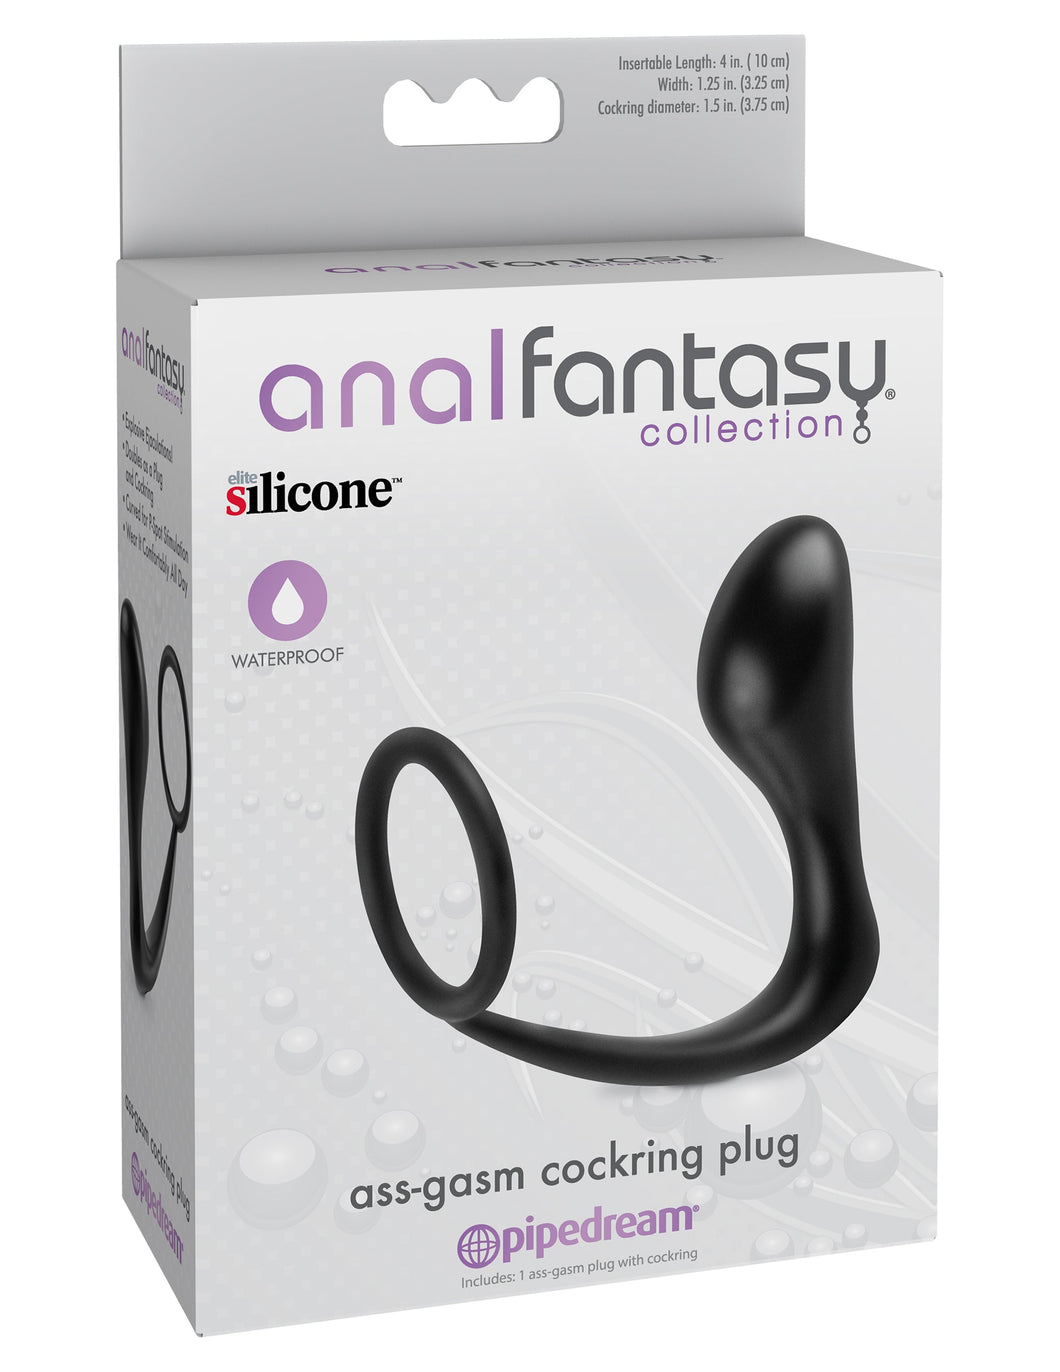 Anal Fantasy Collection - Ass-Gasm Cockring Plug